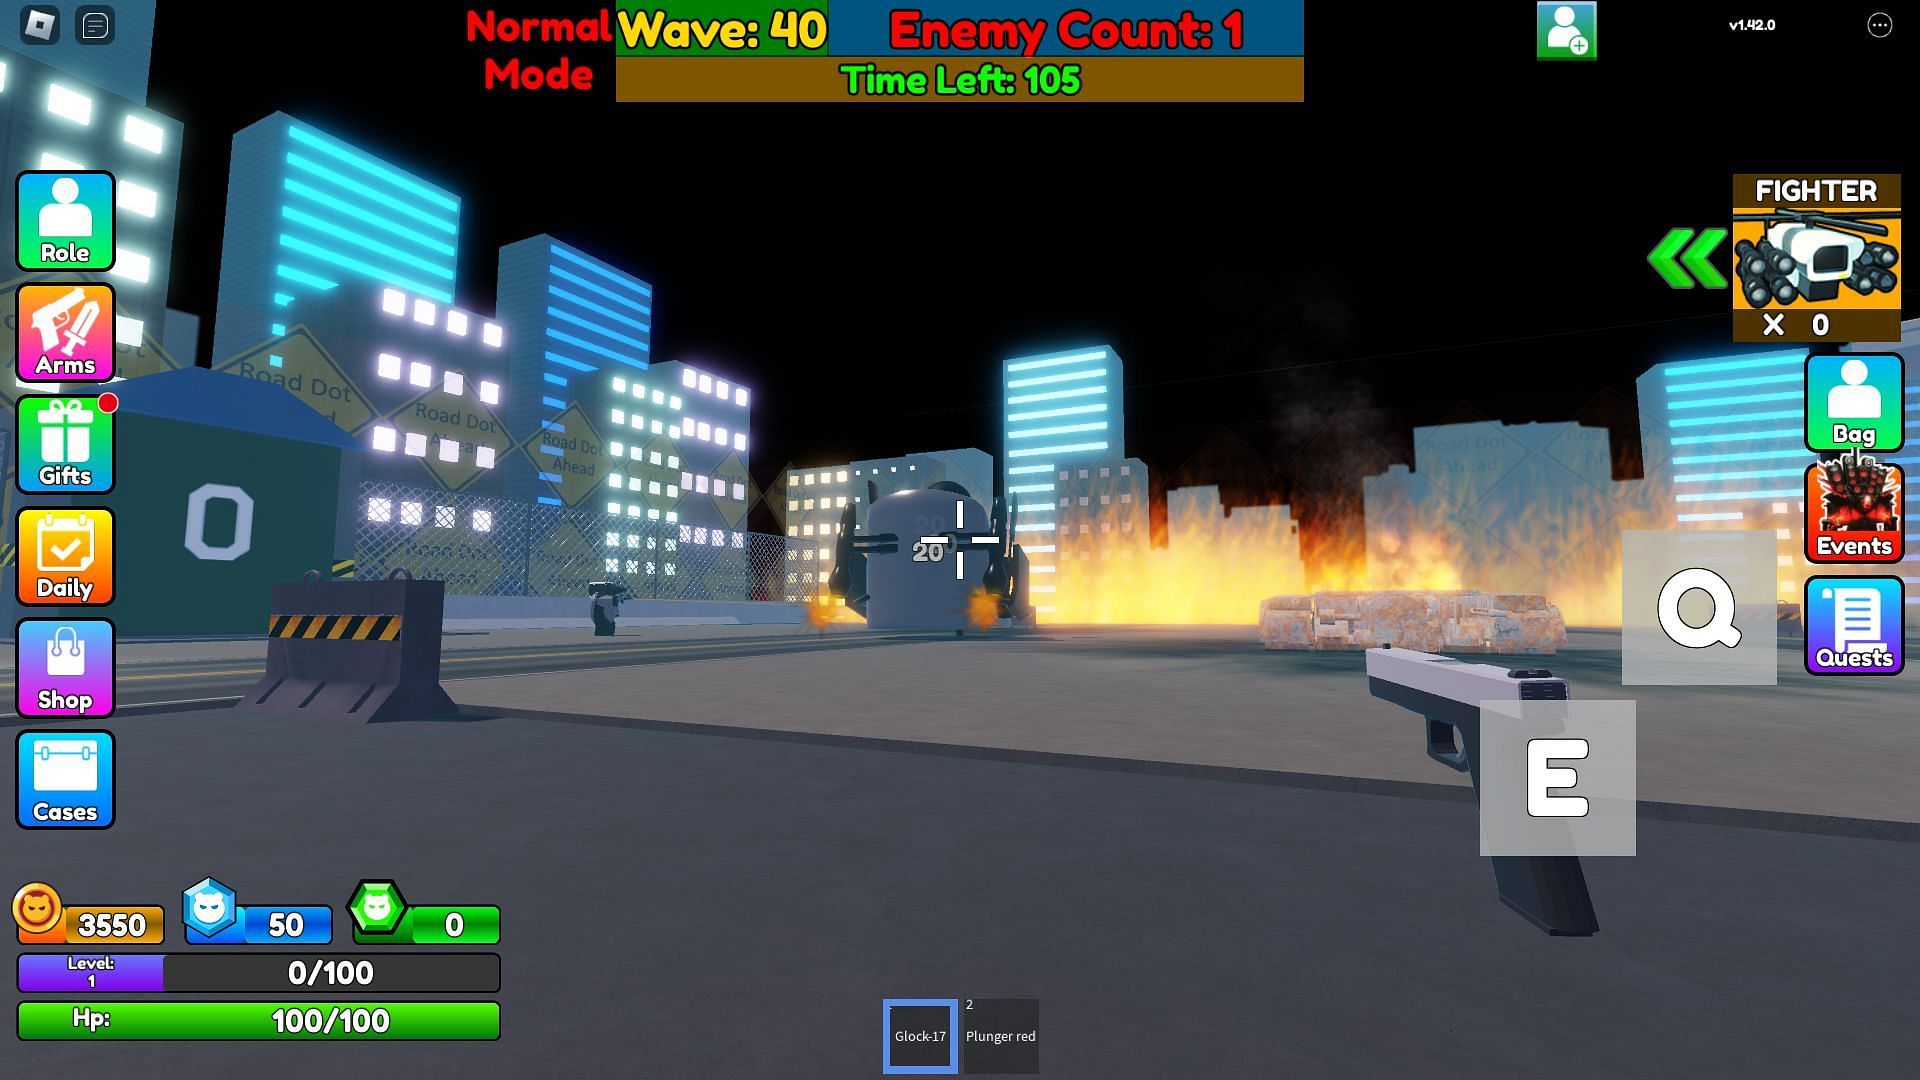 Using a basic weapon in Timed mode (Image via Roblox)